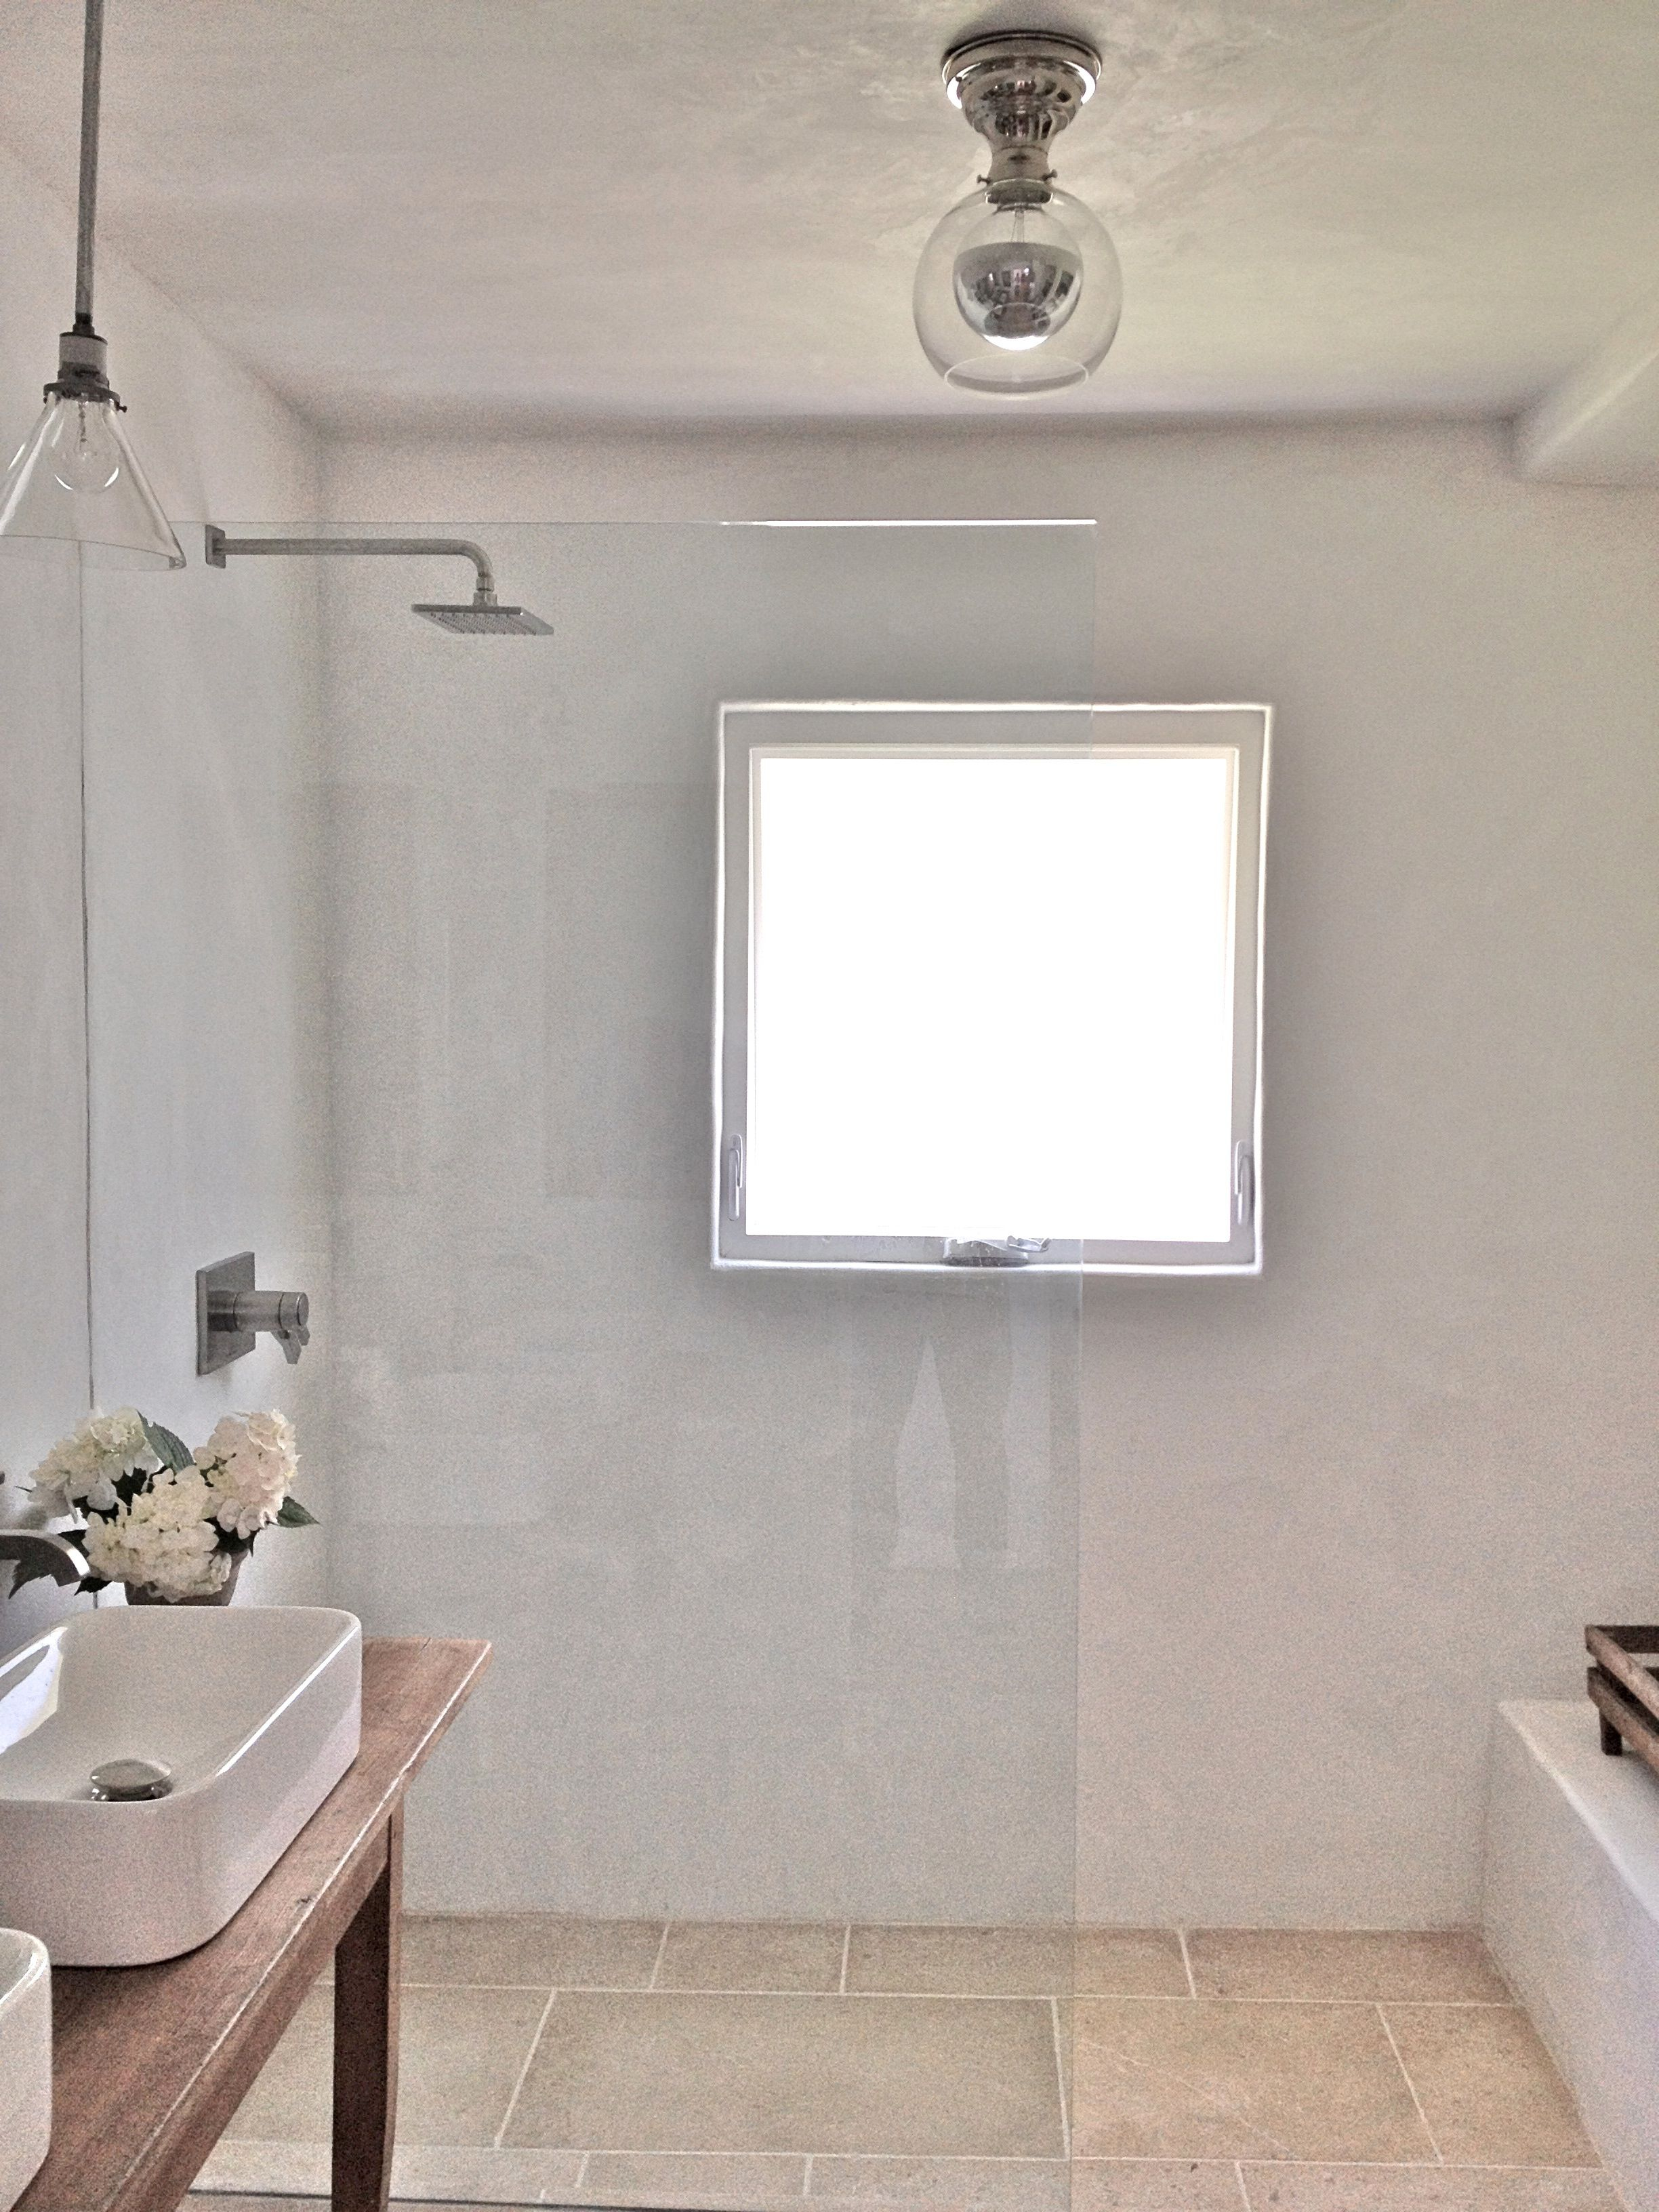 Wall And Ceiling Are Covered In Waterproof Pool Plaster Bathrooms intended for proportions 2448 X 3264